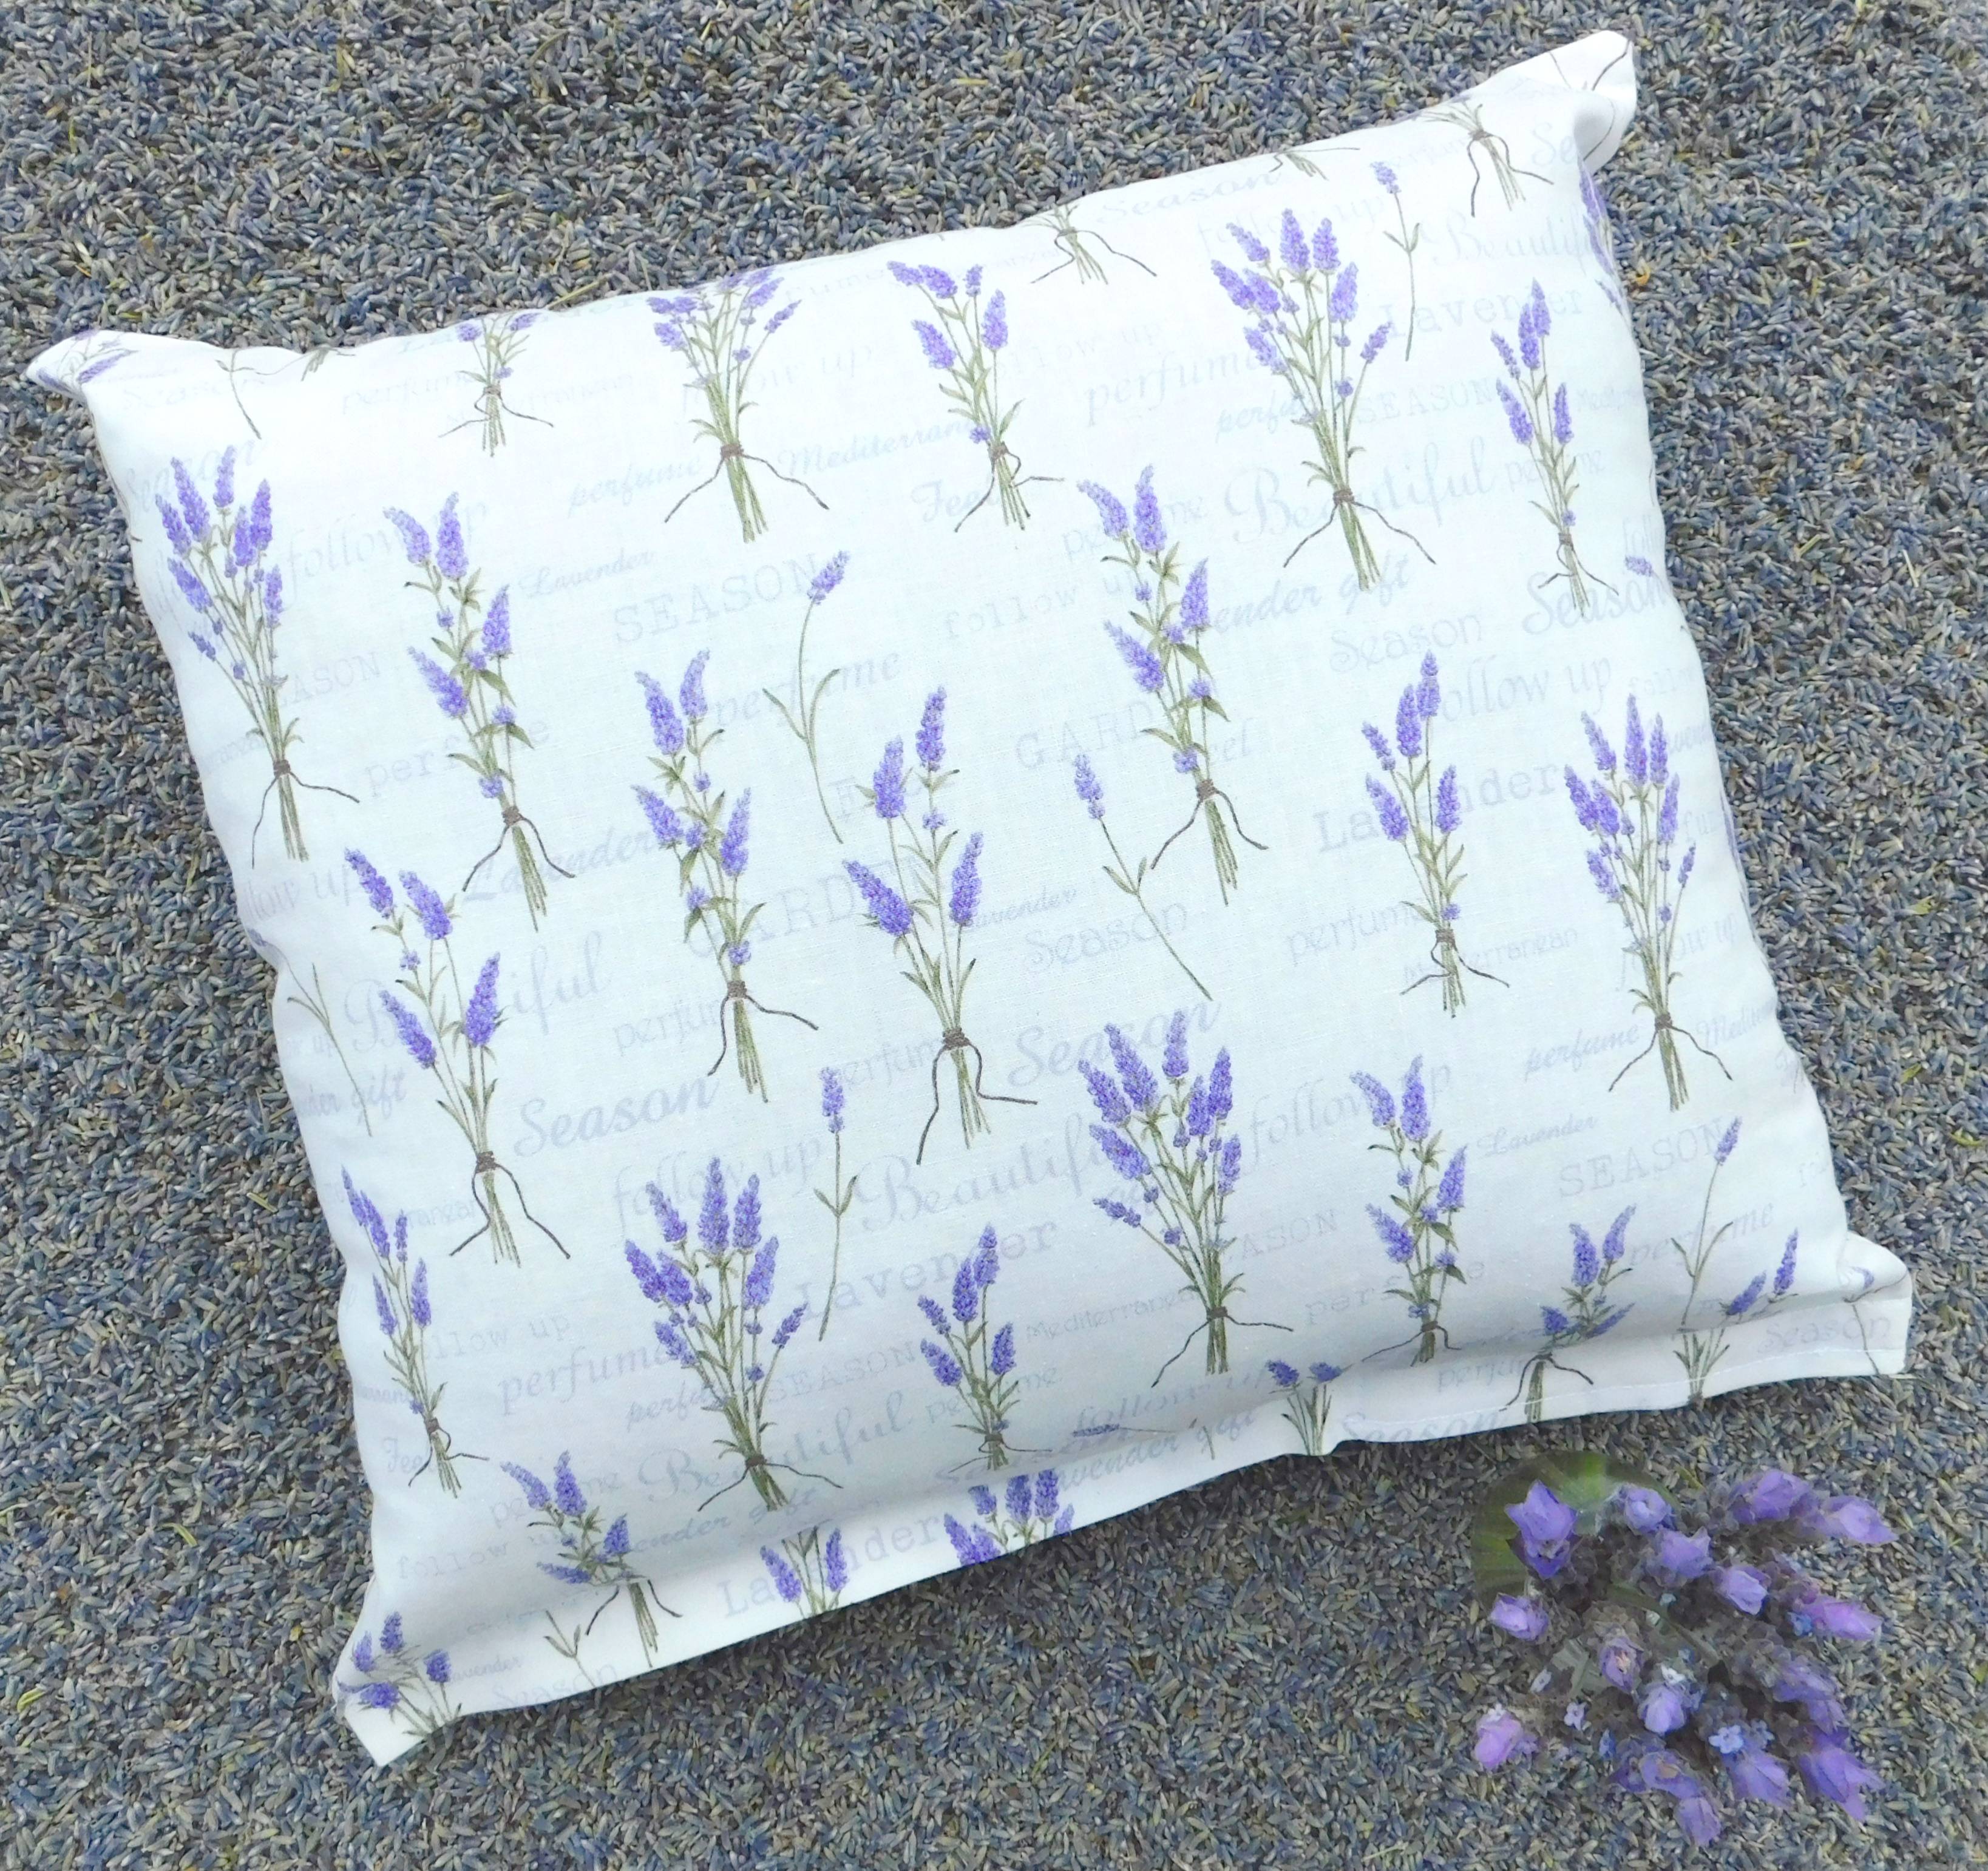 Lavender pillow filled and fragrant!